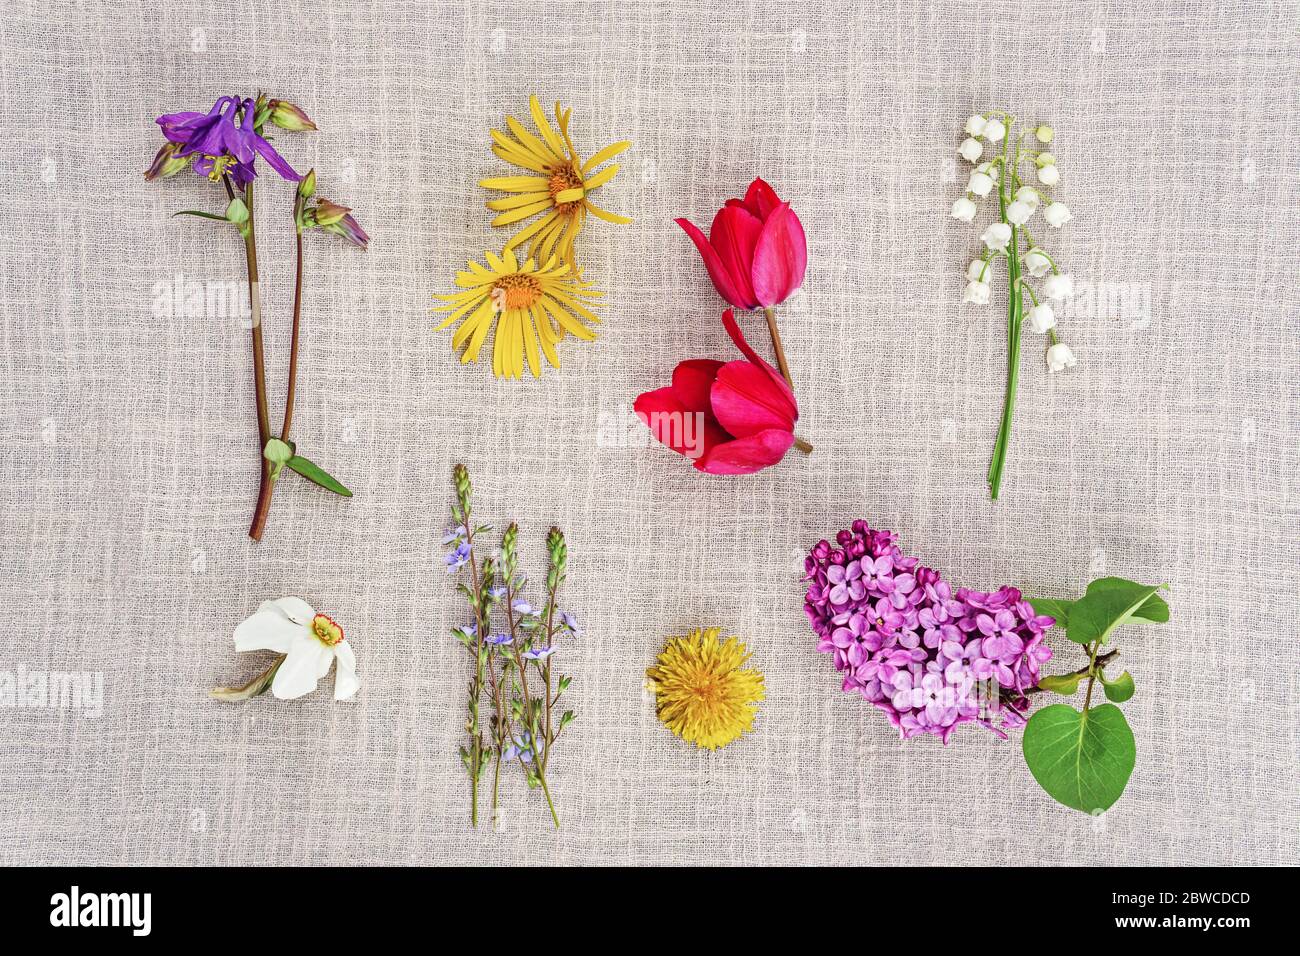 Various flowers on fabric Stock Photo